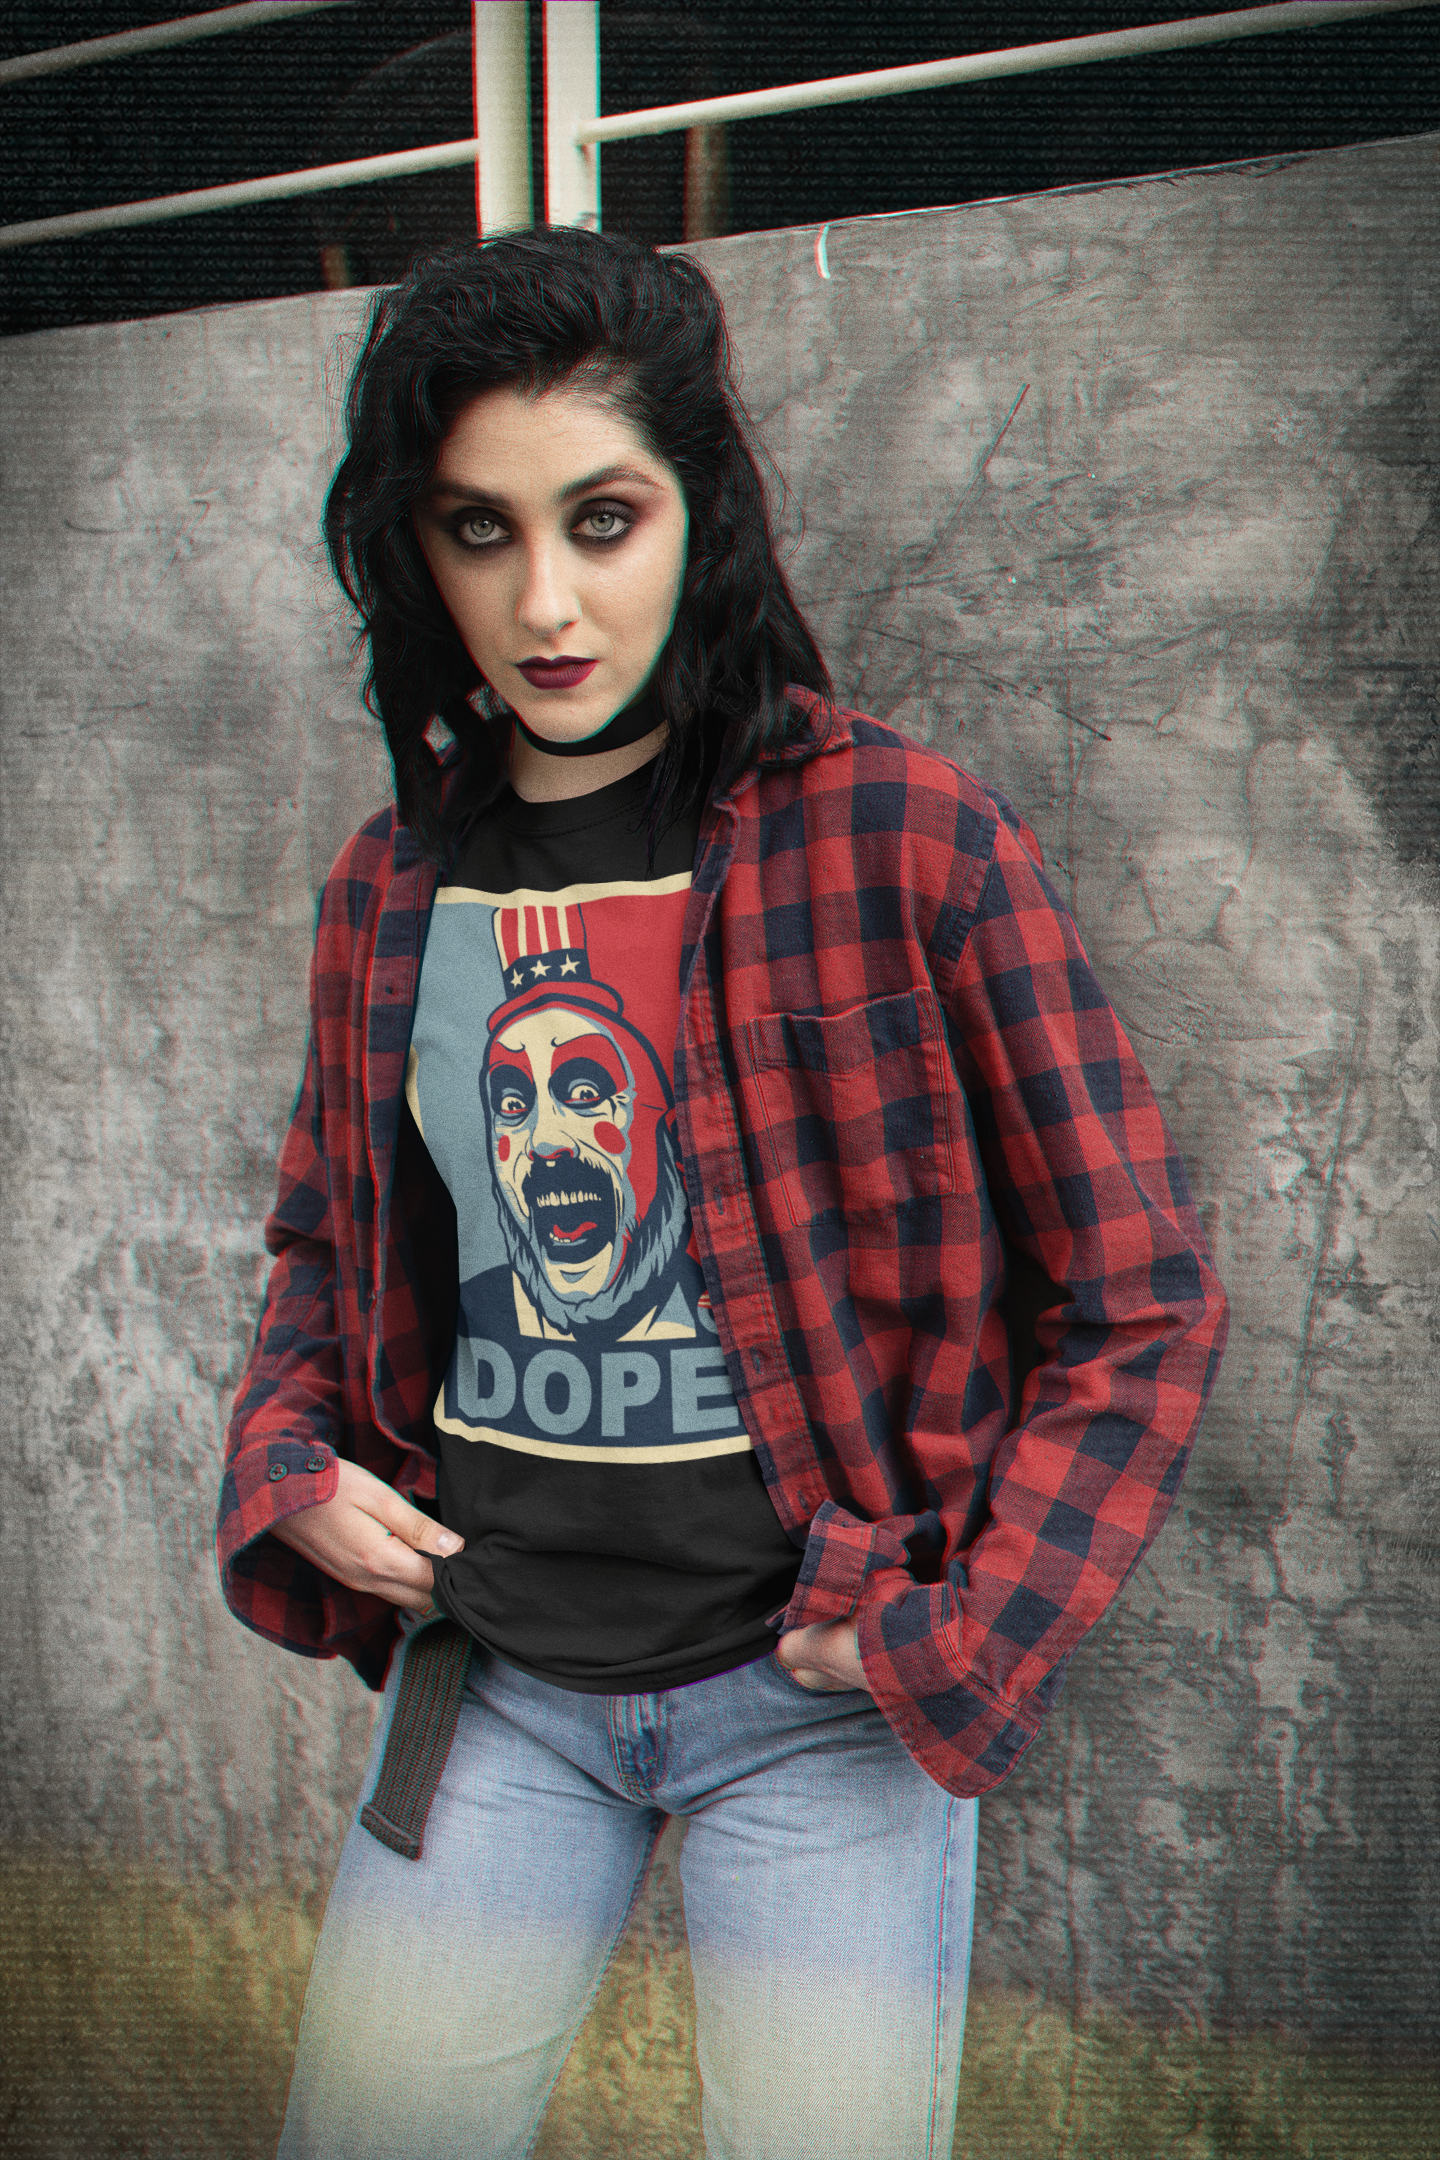 House of 1000 Corpses t-shirt, Captain Spaulding tee.